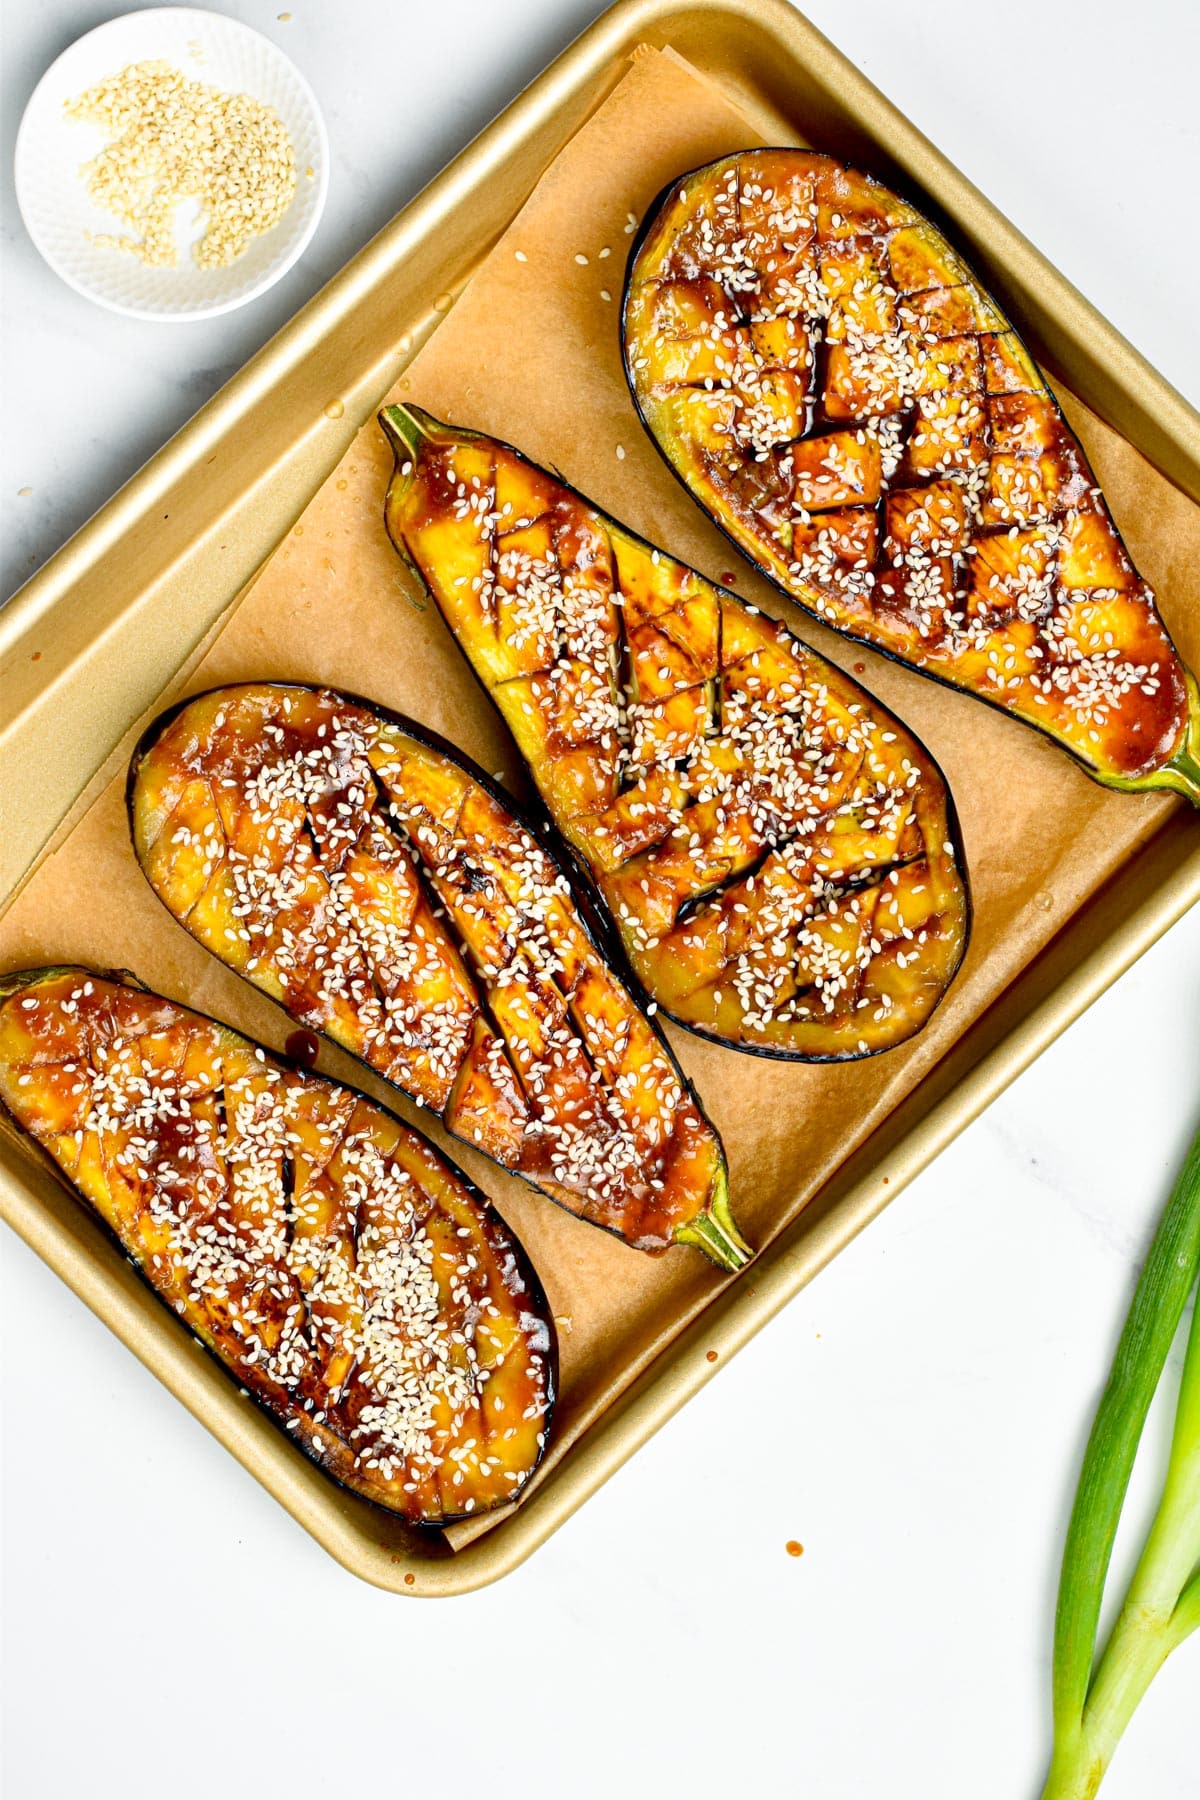 These delicious Miso Glazed Eggplant melt-in-your mouth with the most delicious sweet and savory miso glaze. Bonus, this delicious Asian-style recipe is also vegan and gluten-free.